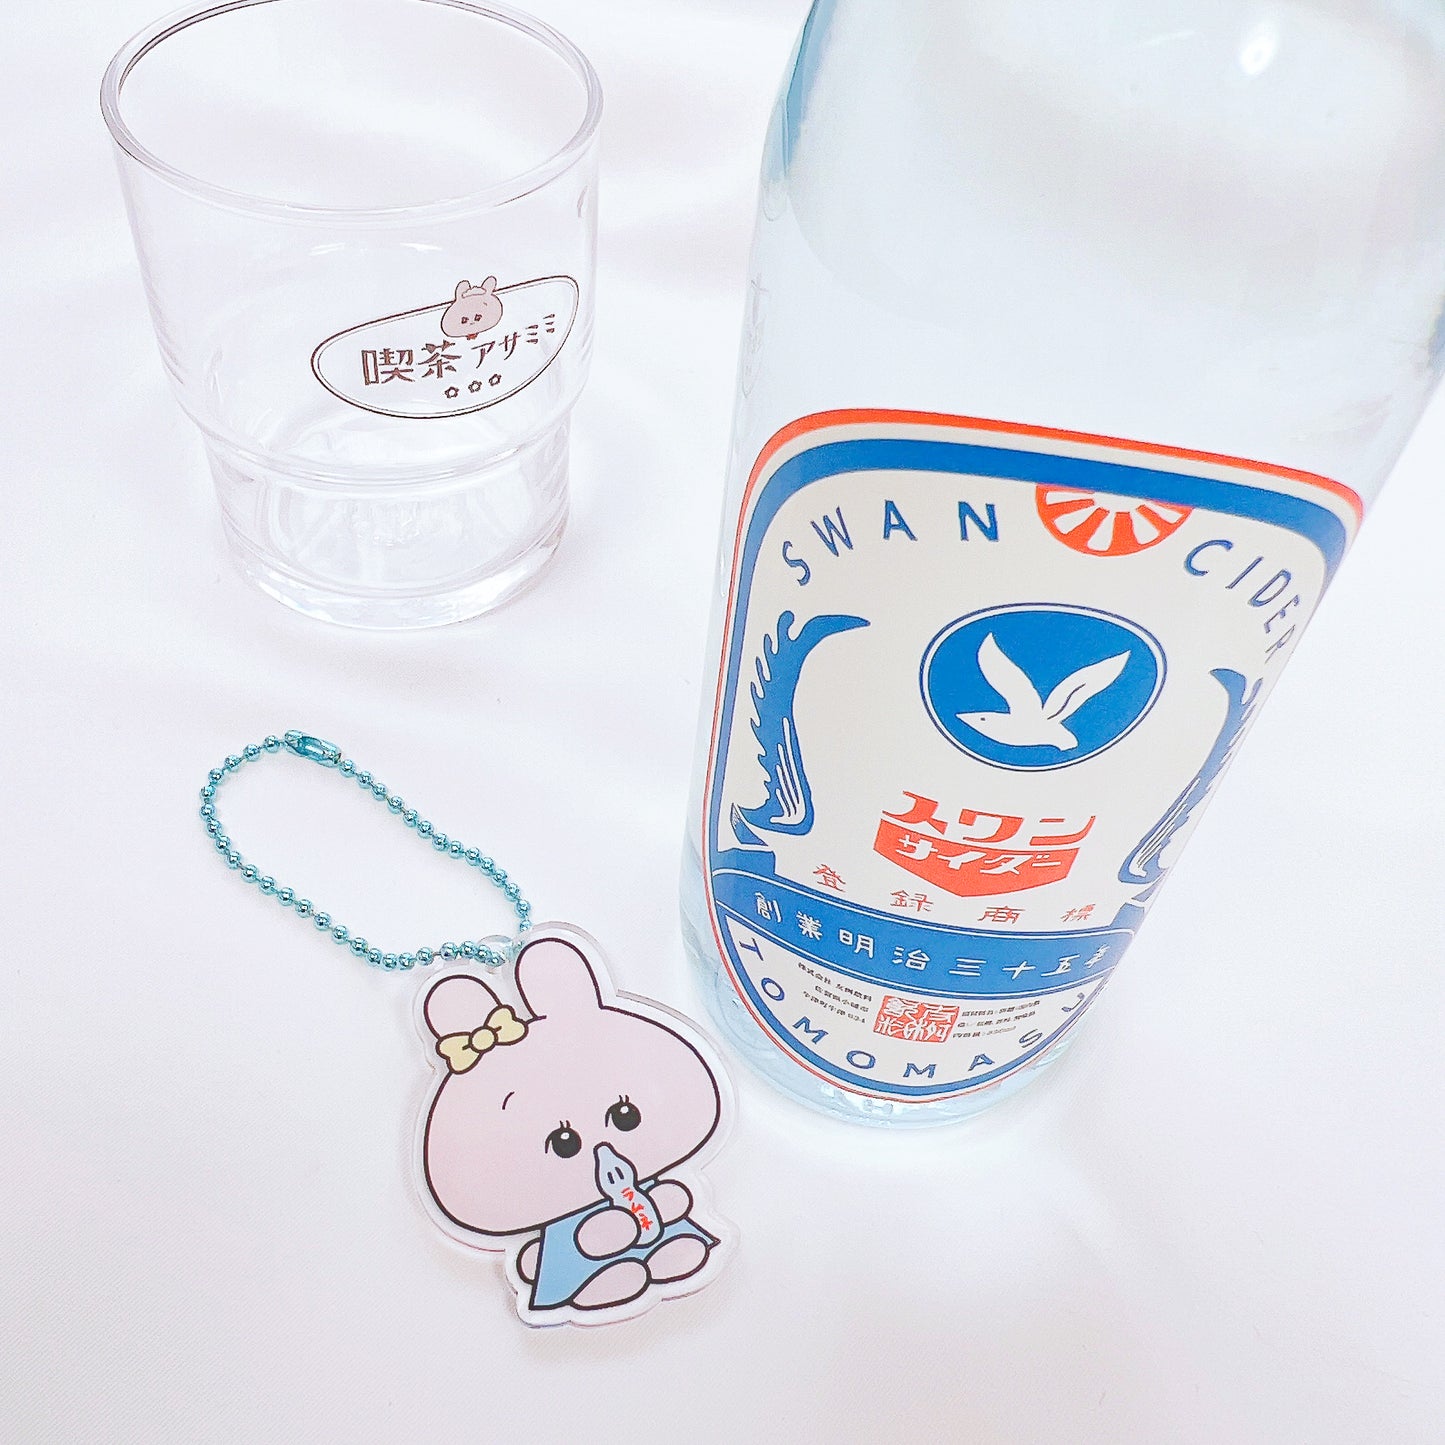 [Asamimi-chan] Water glass (200ml) [Shipped in mid-November]